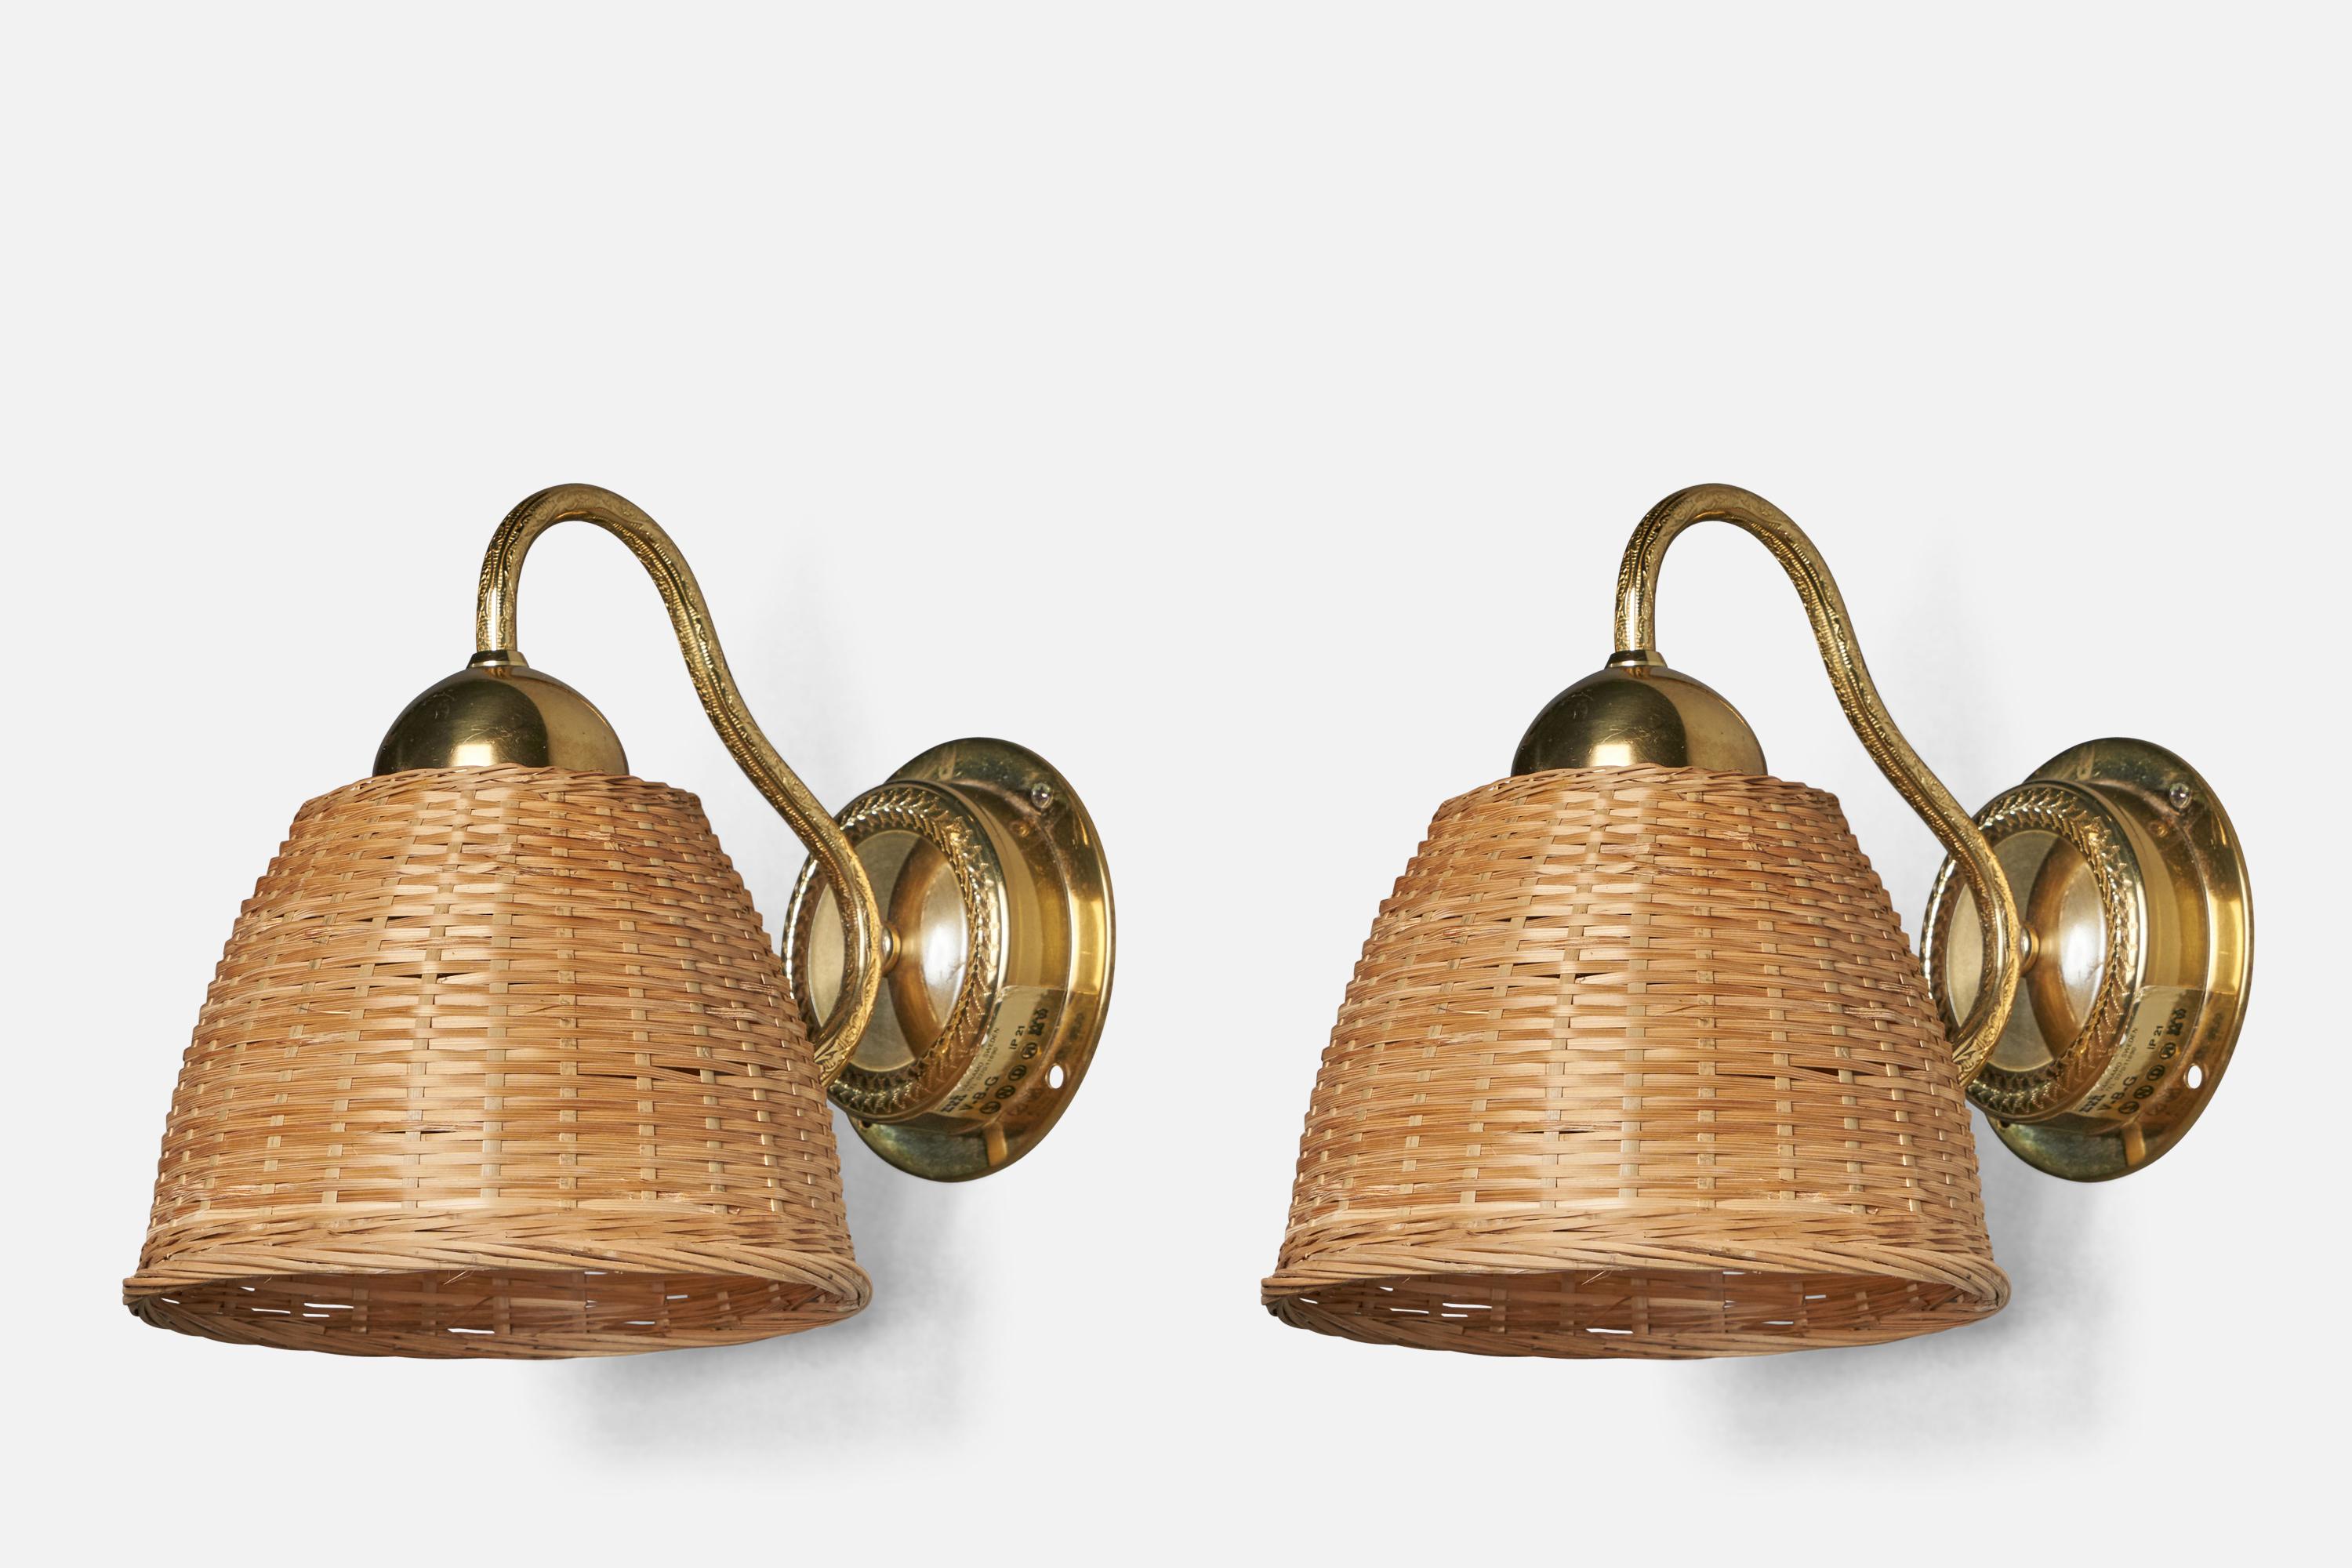 A pair of brass and rattan wall lights, designed and produced by EWÅ Värnamo, Sweden, 1970s.

Overall Dimensions (inches): 7.75